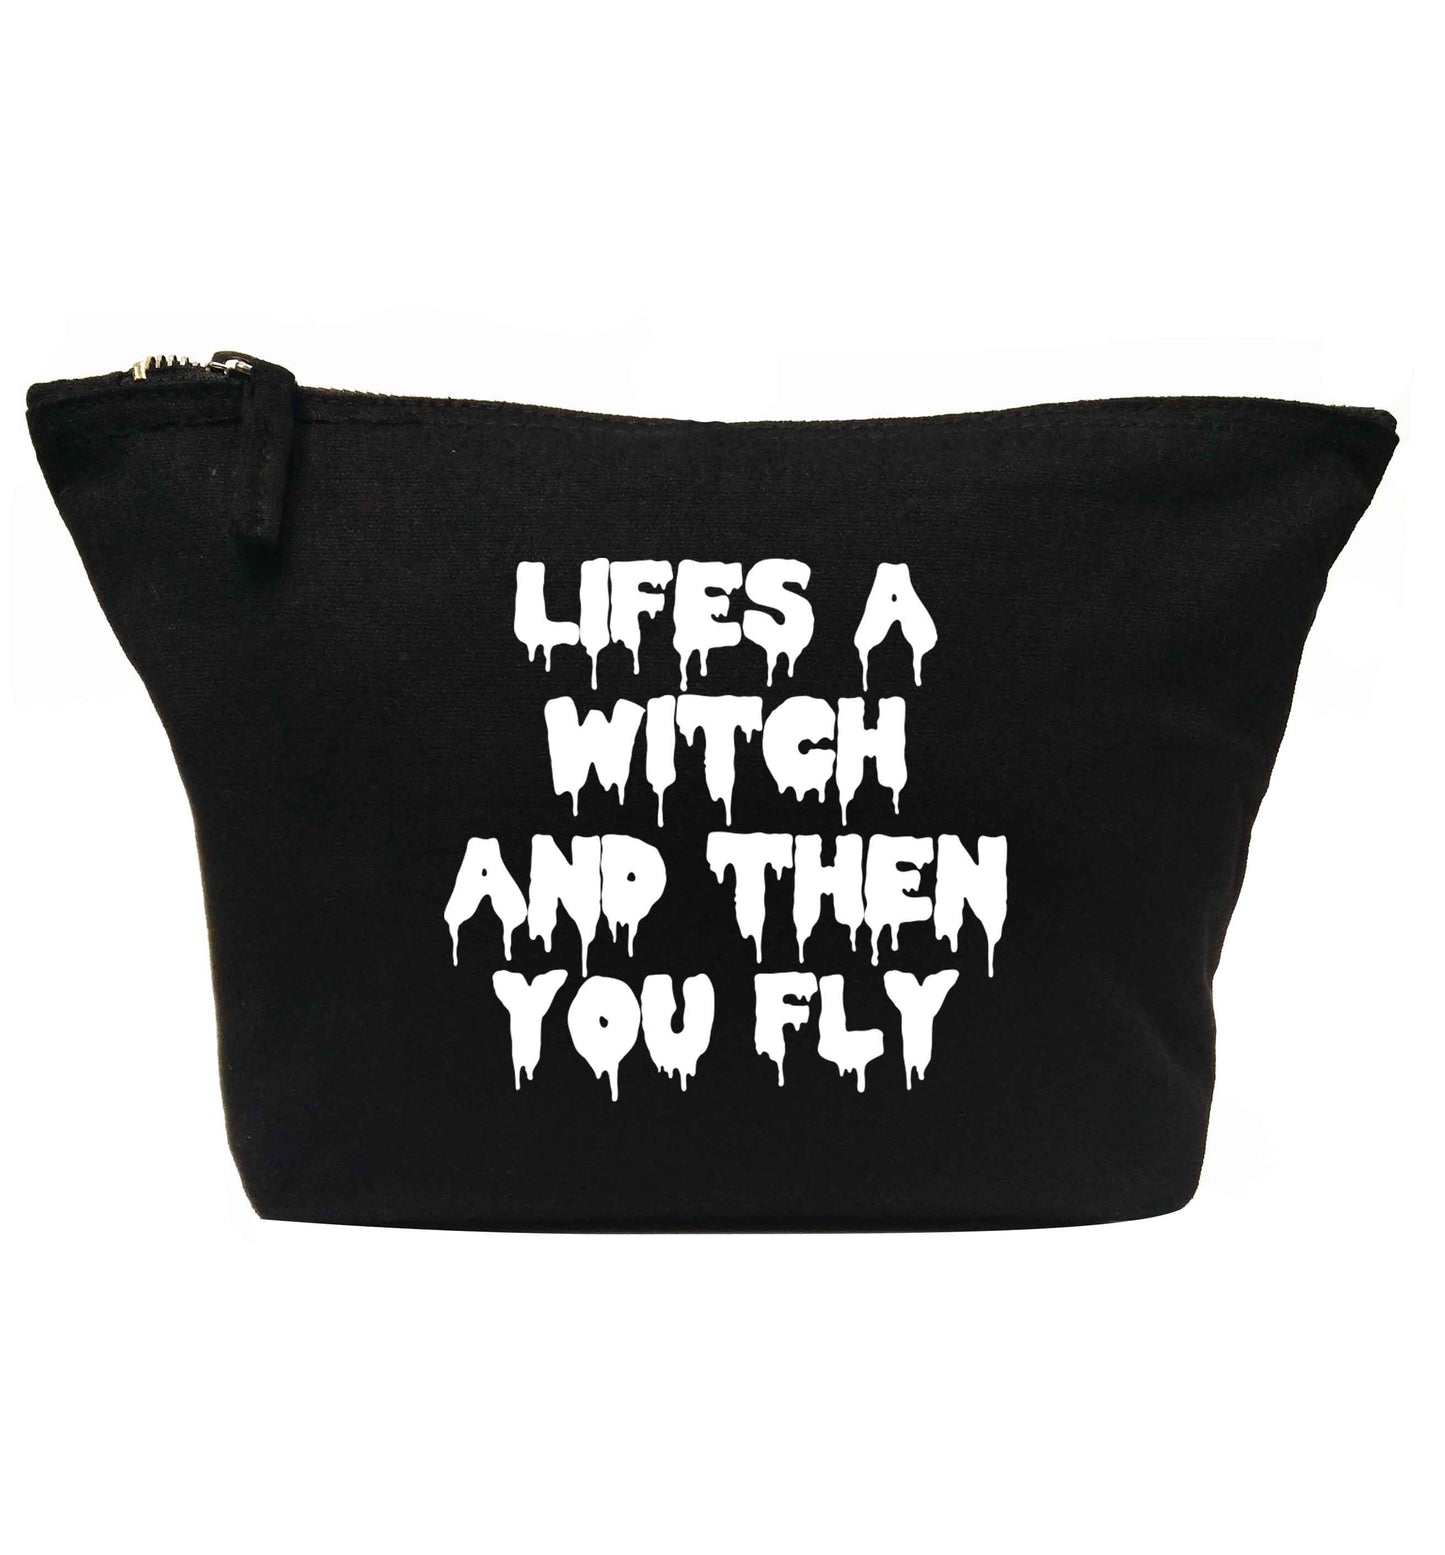 Life's a witch and then you fly | Makeup / wash bag